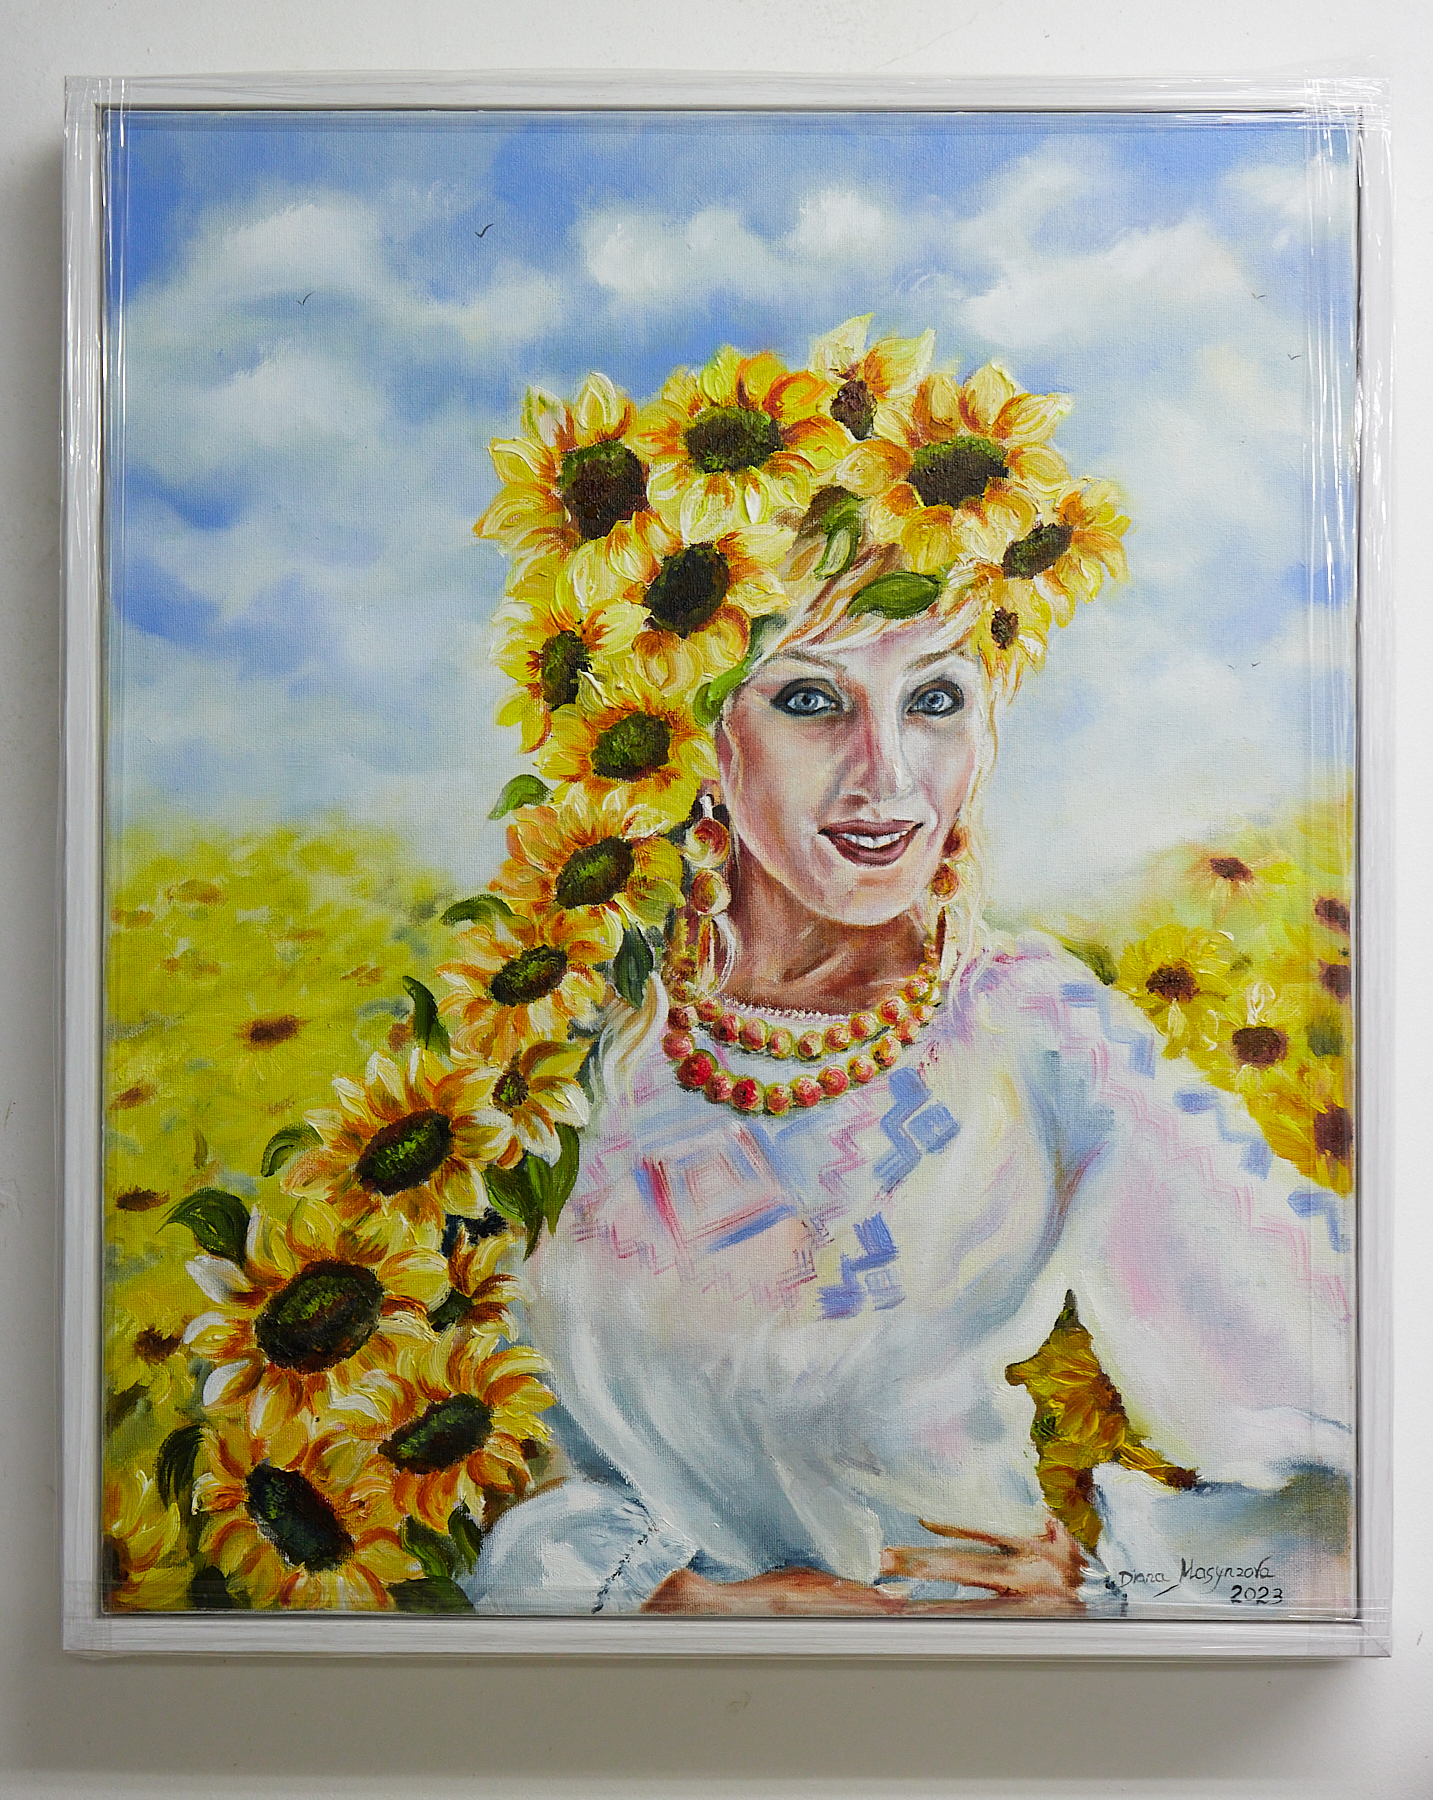 Diana Masynzova, Ukraine - Kyiv and Warsaw. Original titled 'Girl with Sunflowers in her hair '.